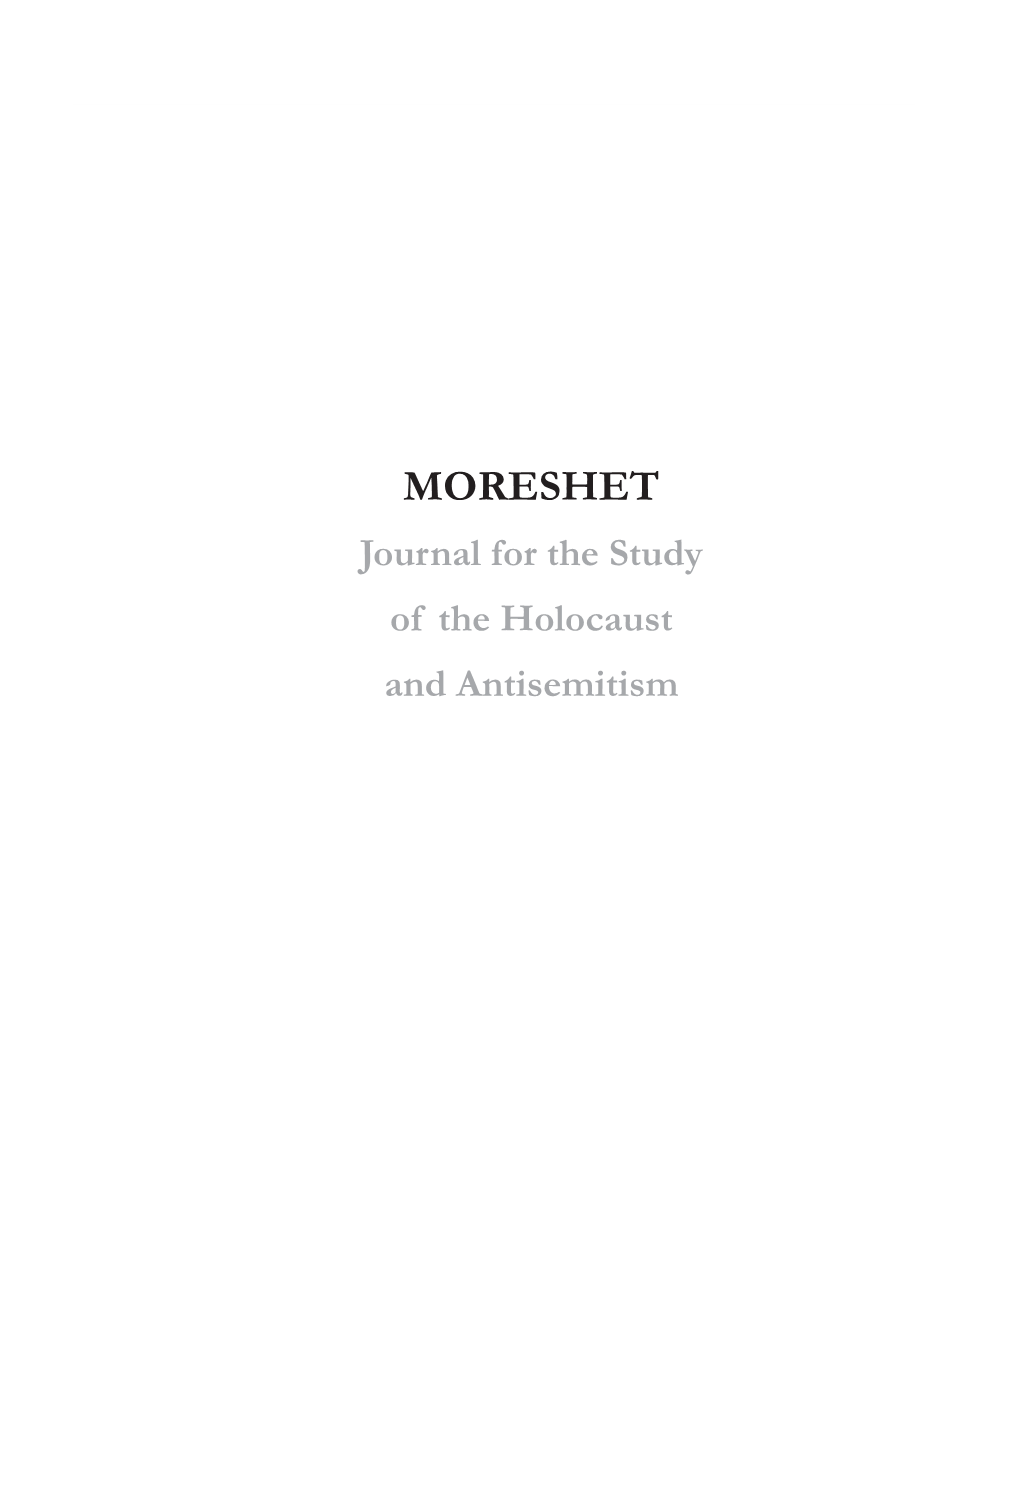 MORESHET Journal for the Study of the Holocaust and Antisemitism 2 | MORESHET • VOL